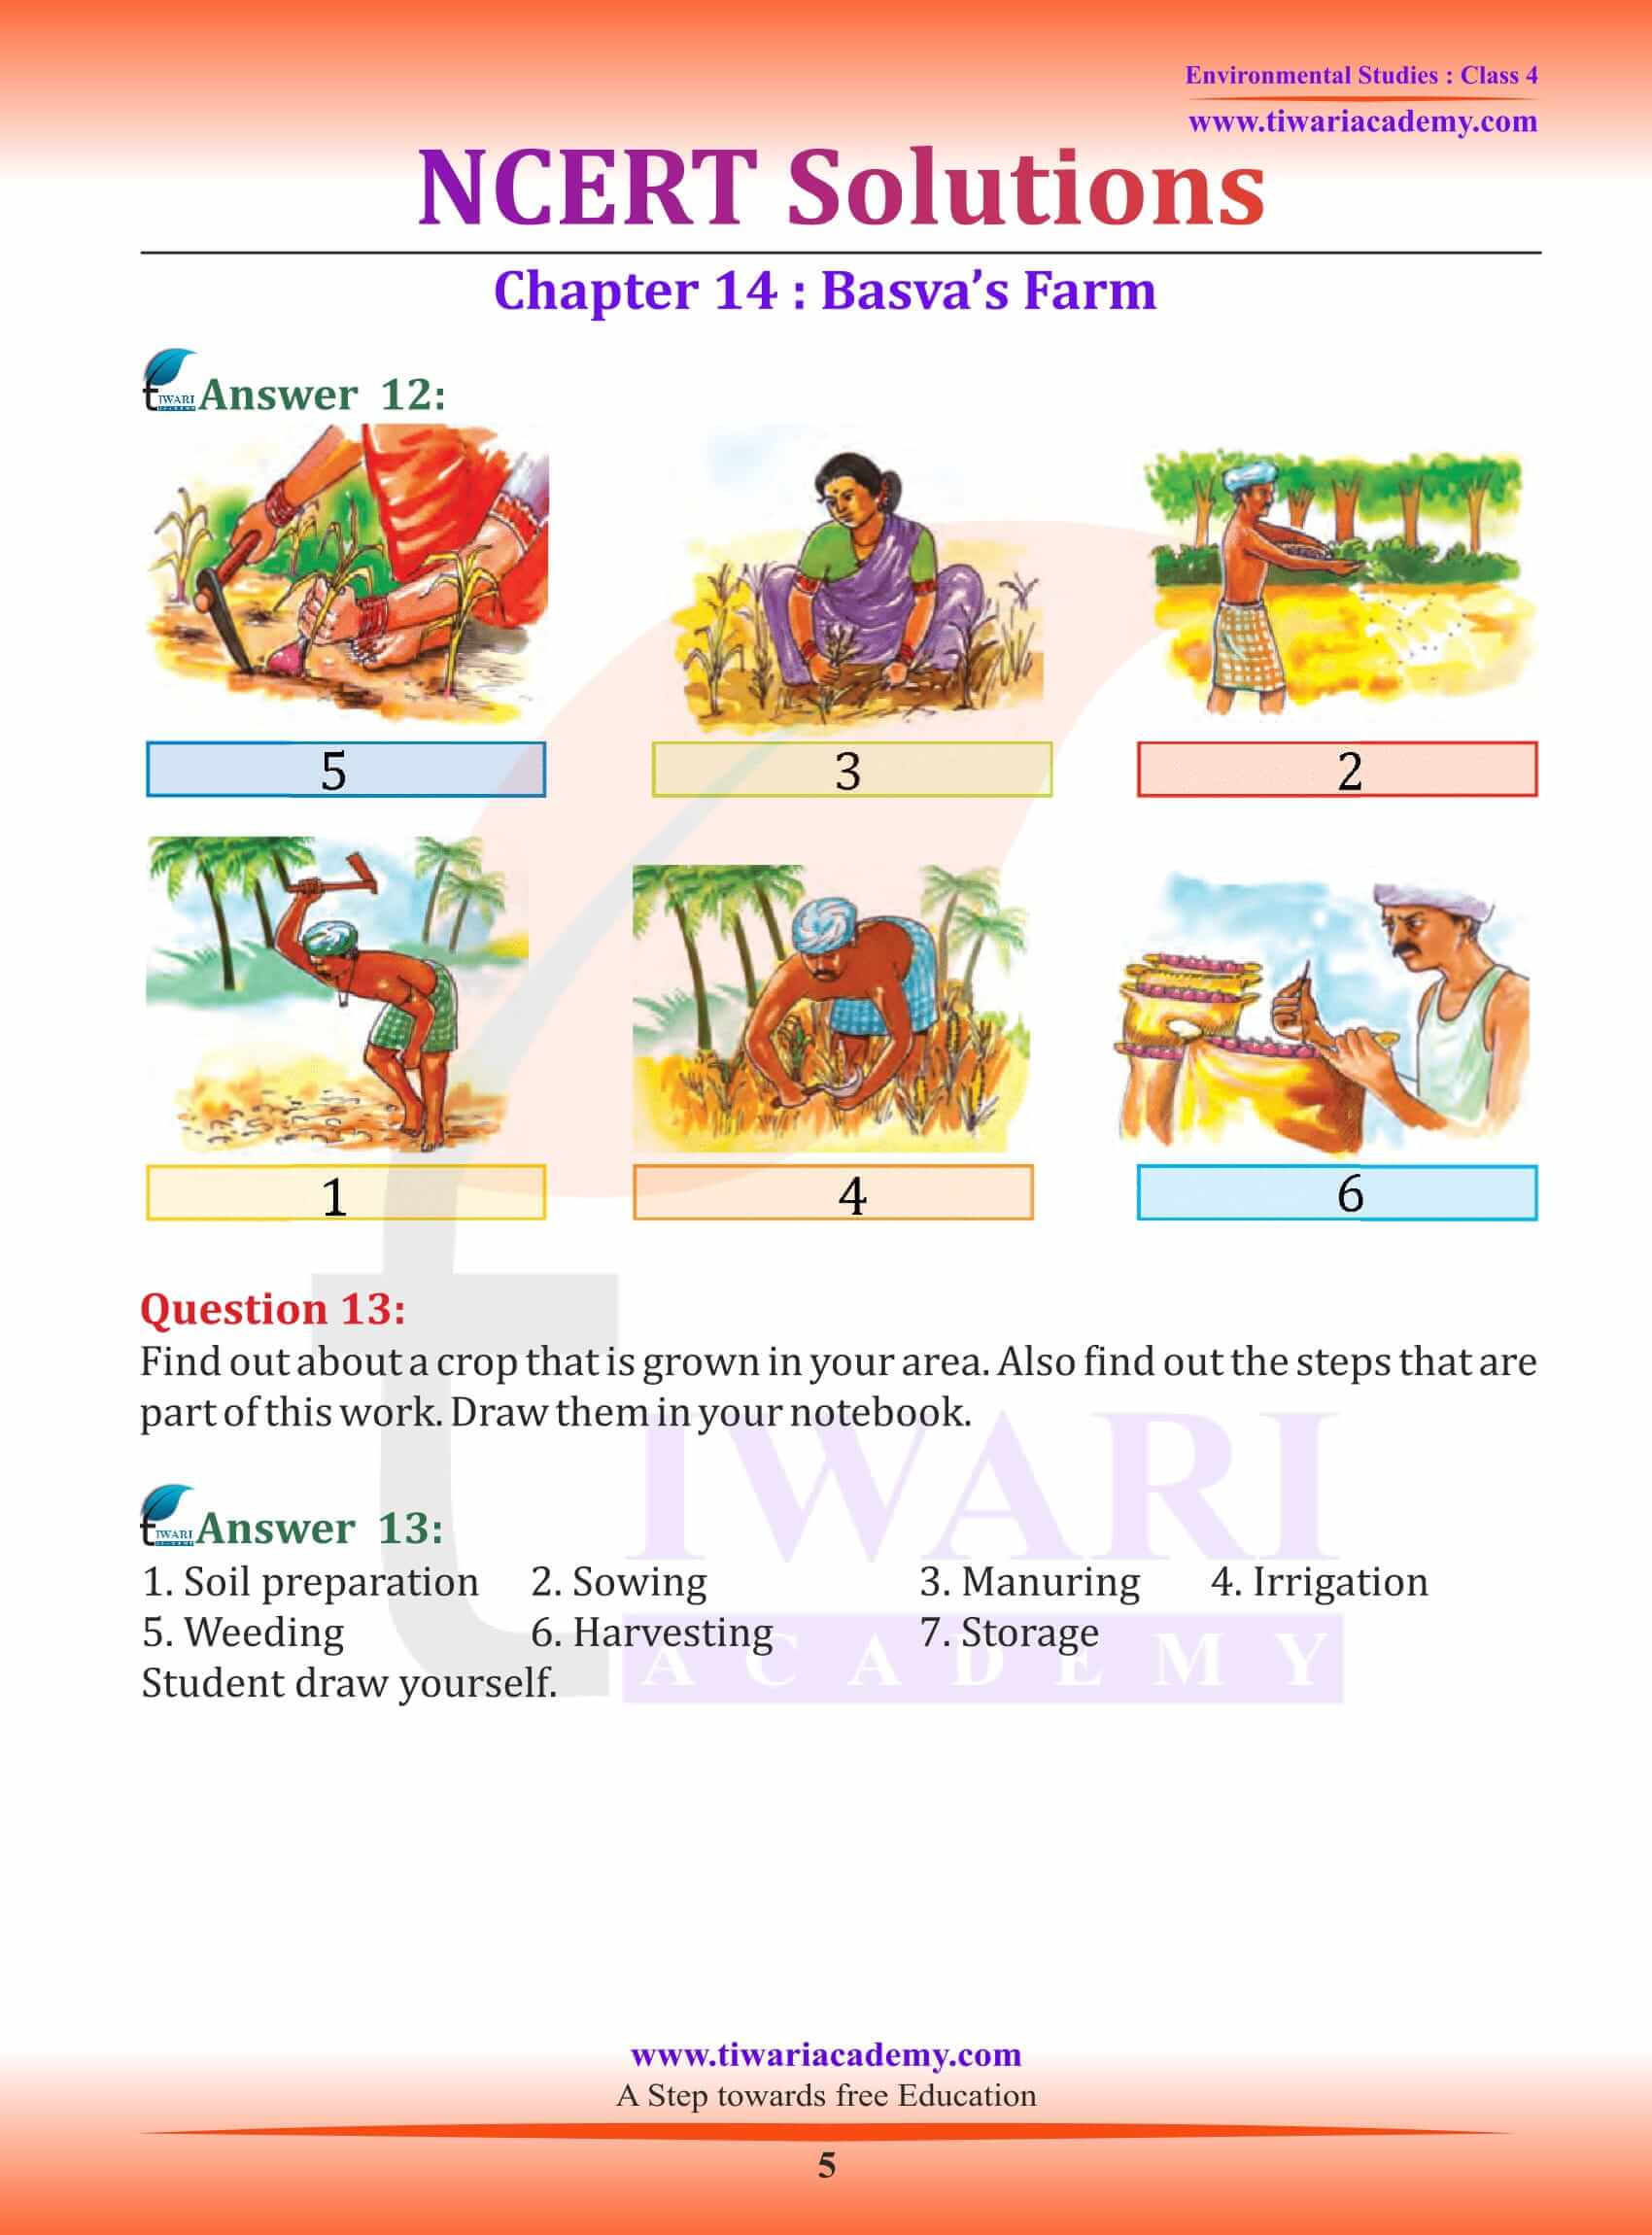 NCERT Solutions for Class 4 EVS Chapter 14 guide